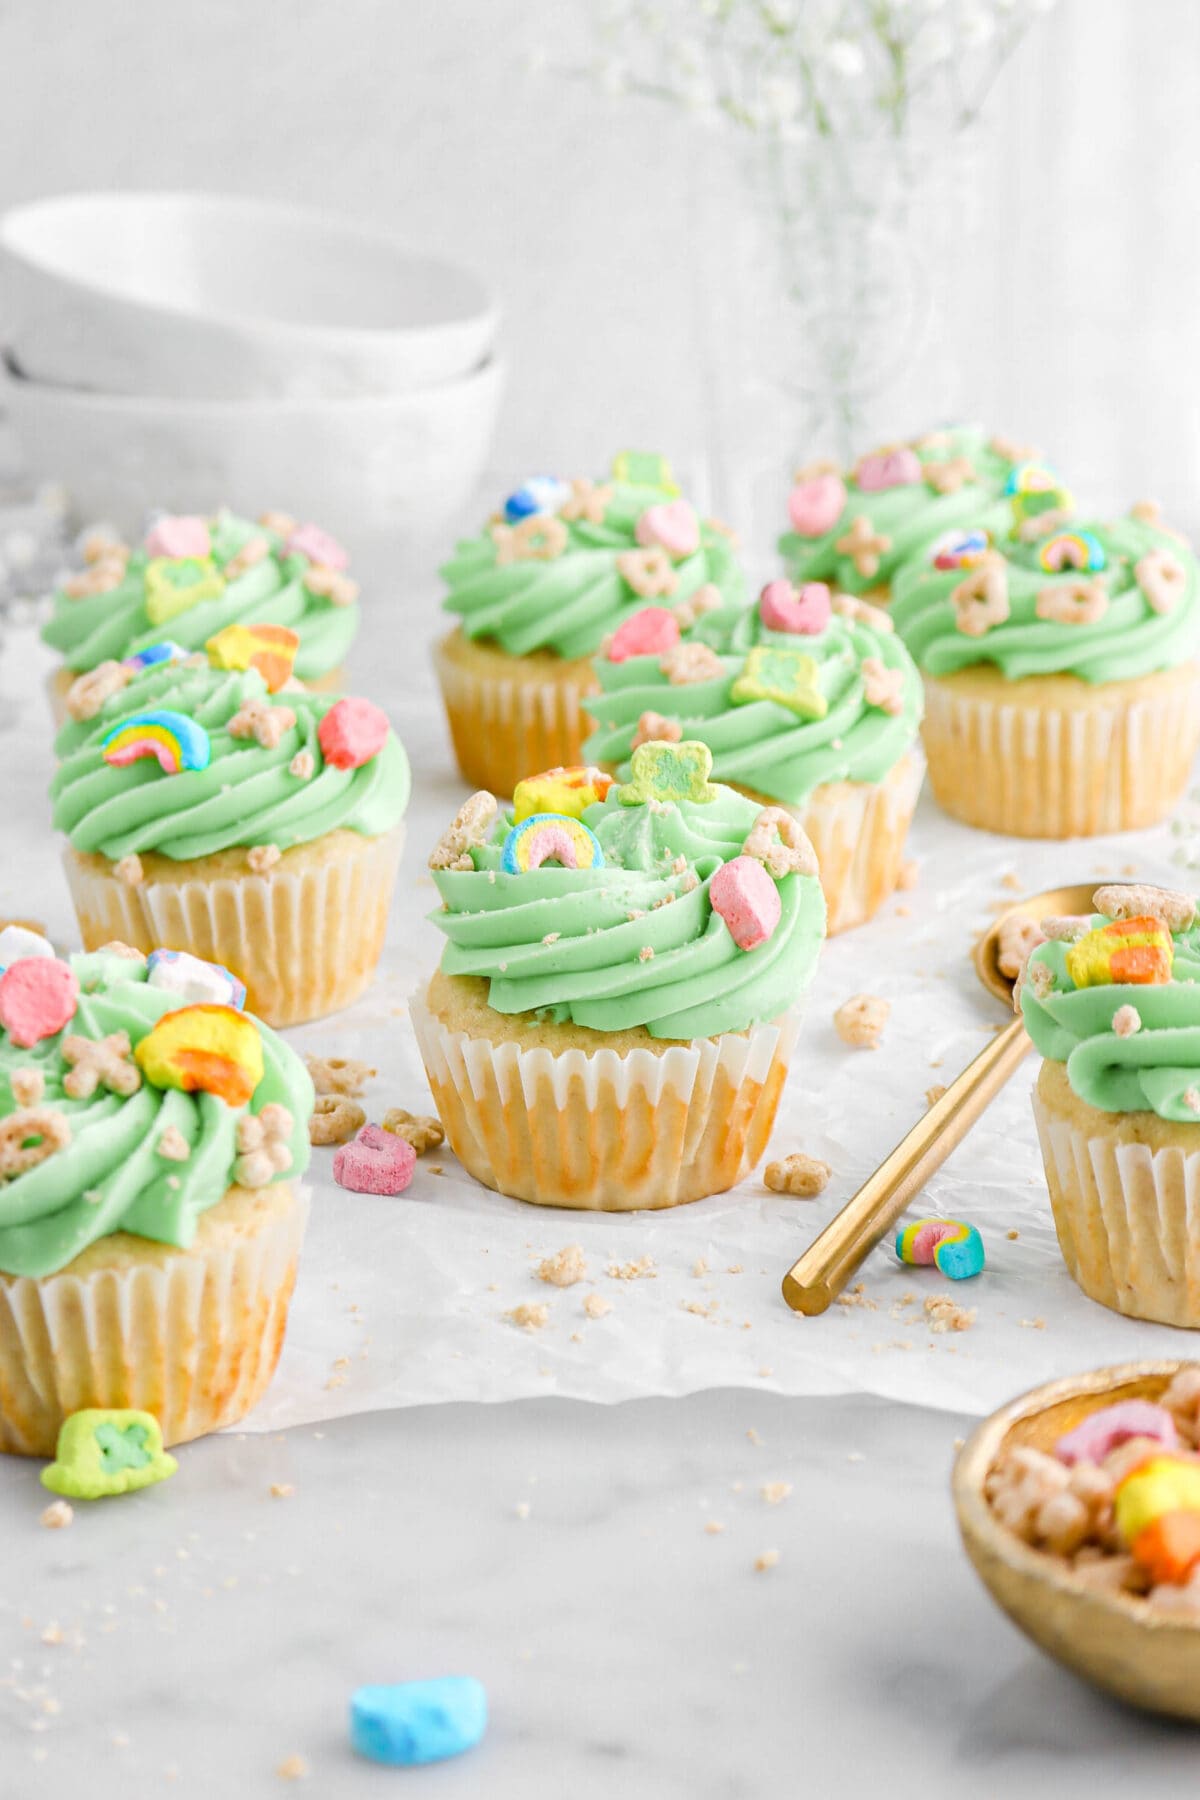 nine lucky charms cupcakes on parchment paper with cereal scattered around, a gold bowl and gold spoon beside cupcakes with white flowers behind, as well as stack of mugs.